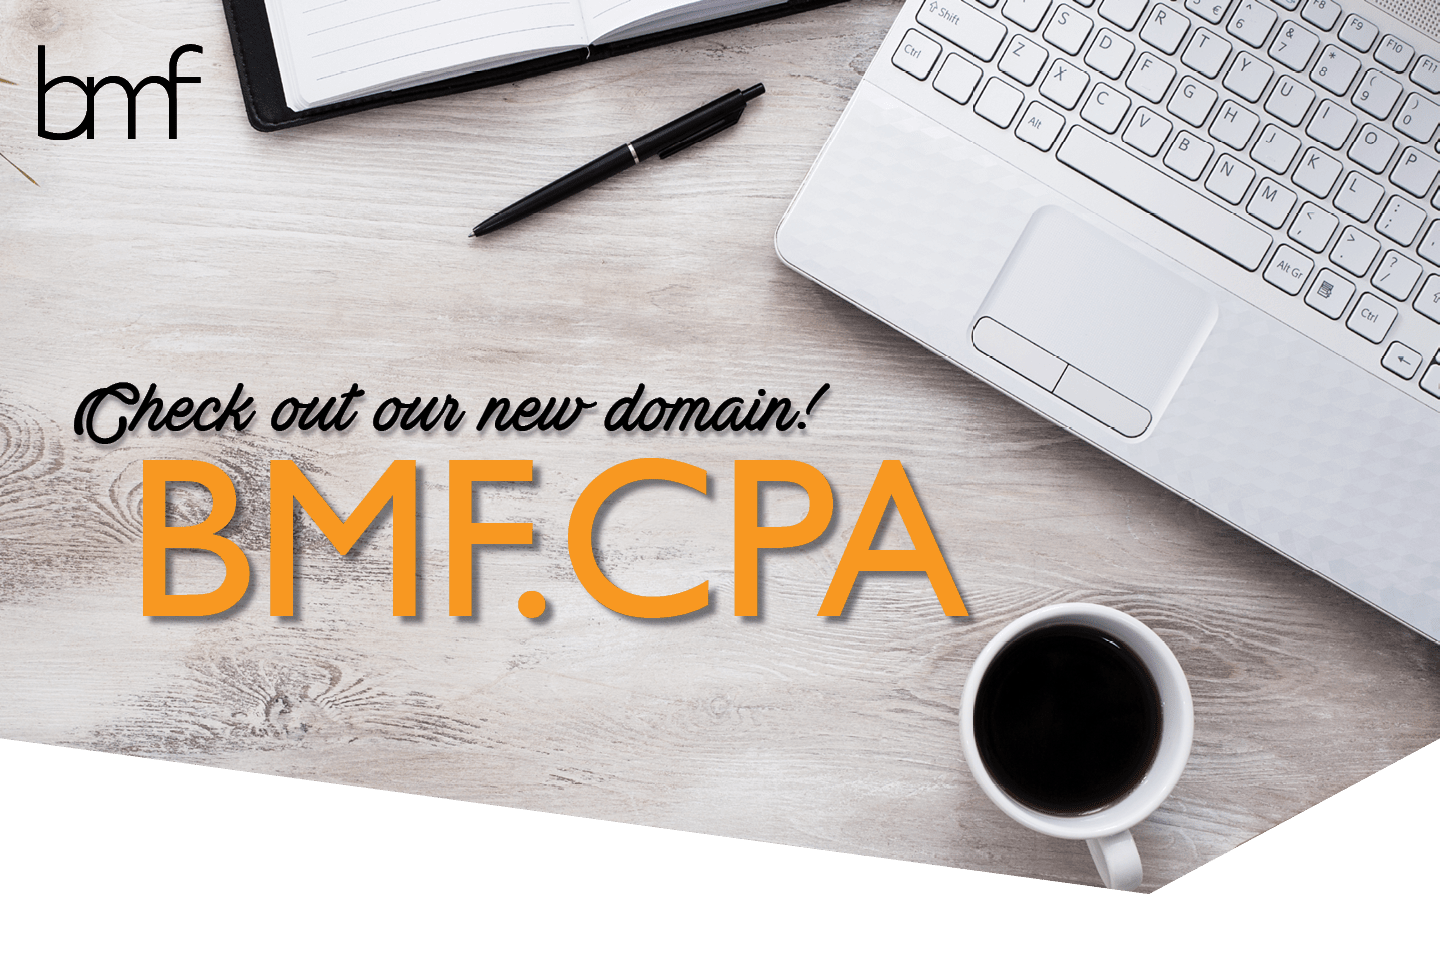 Now BMF.CPA! Our website and email addresses have changed